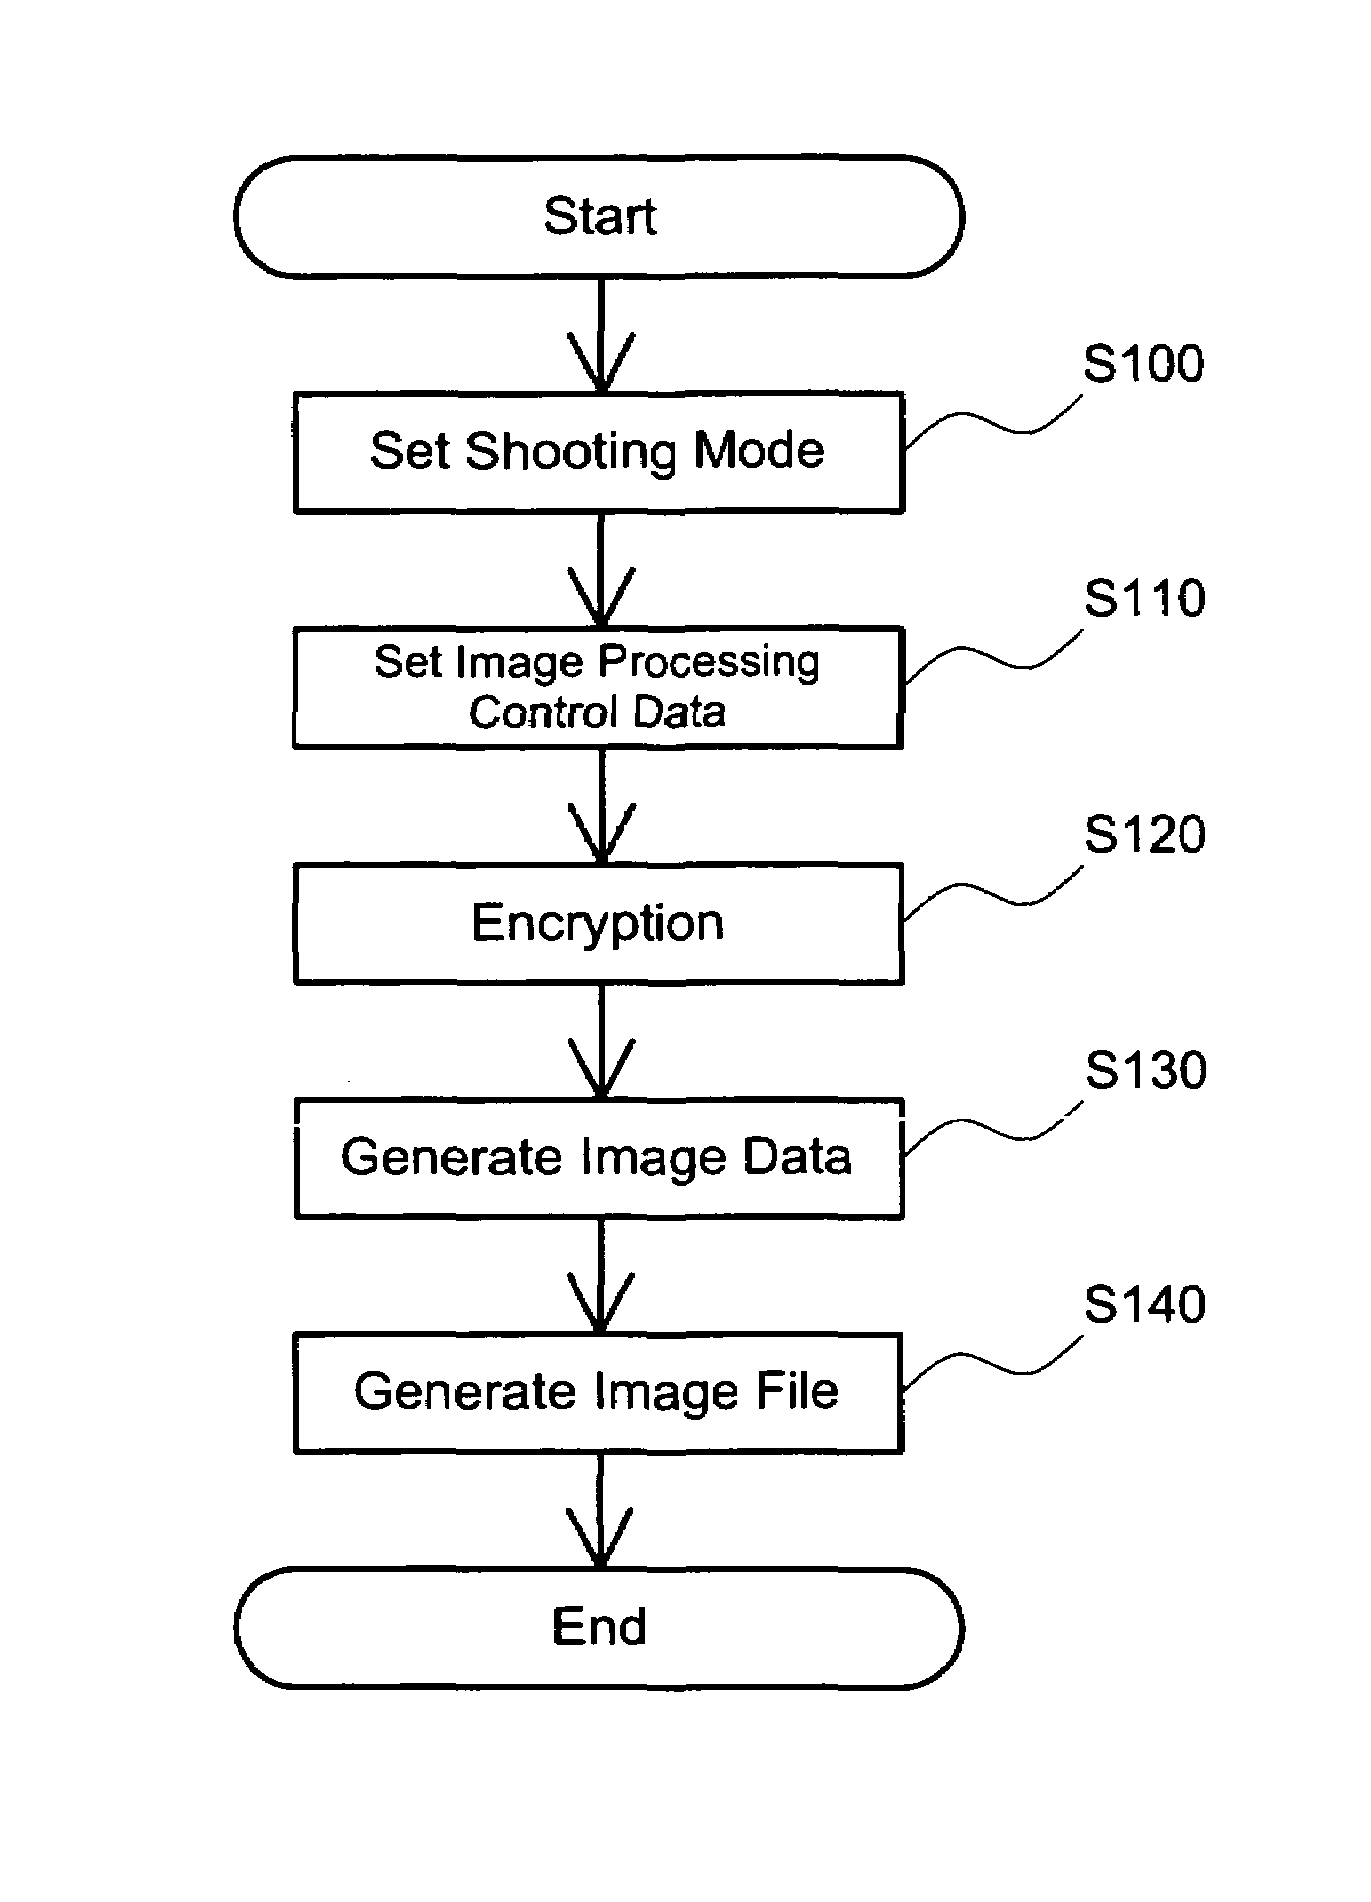 Creation of image file